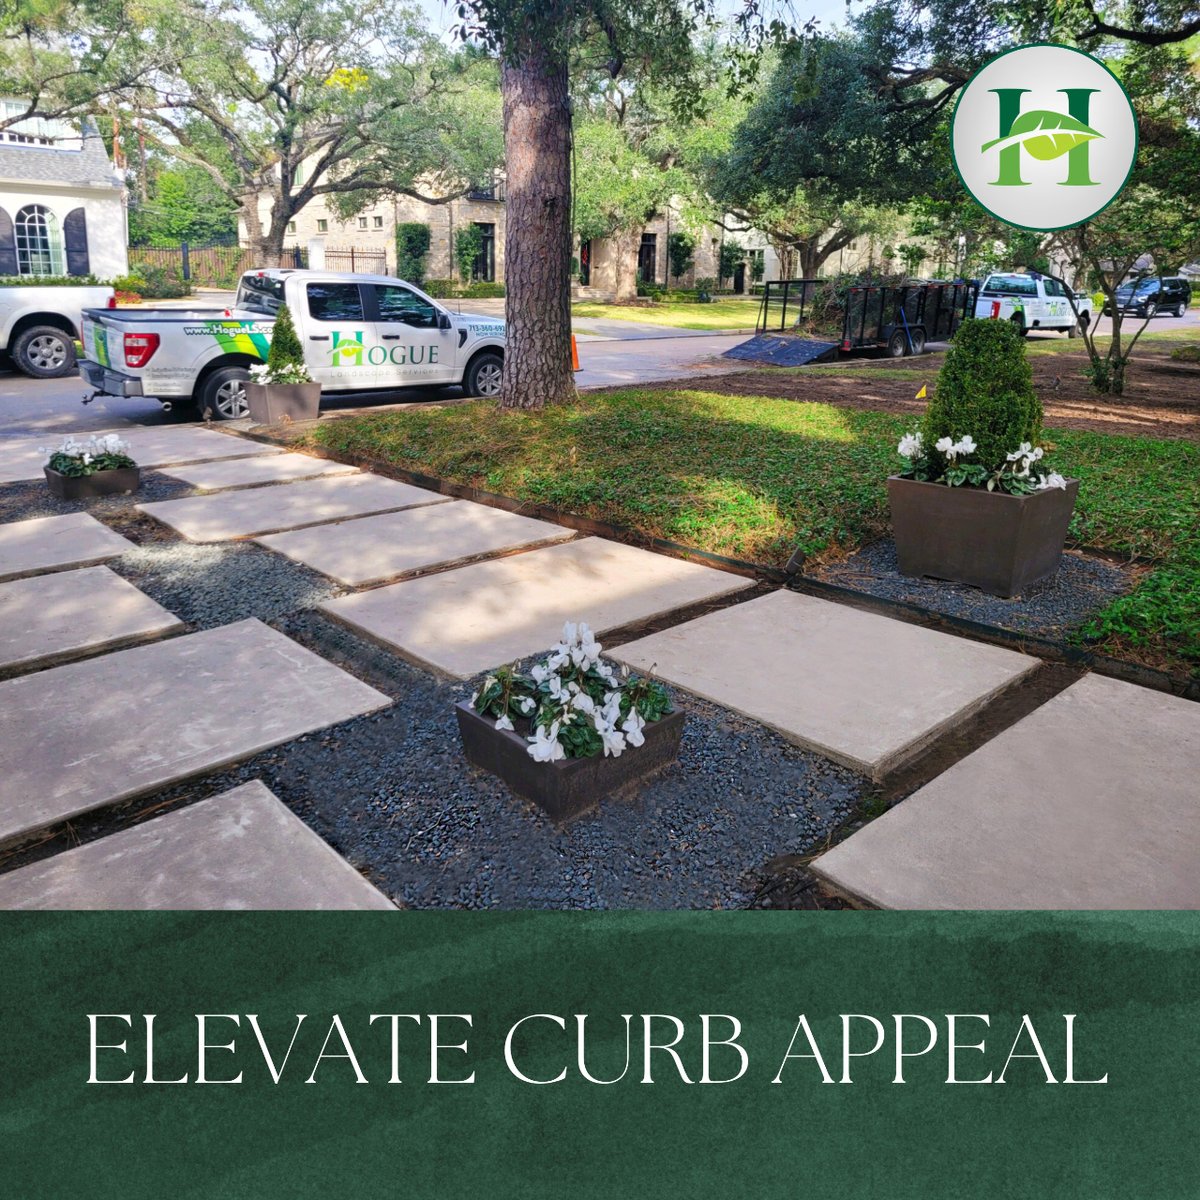 Unleash the potential of your home with our stunning patio and installations! Our expert landscape services not only enhance aesthetics but also add undeniable value. 🌿✨

#LandscapeLuxury #LuxHome #LandscapeDesign #HoustonHomes #HomeUpgrades #LandscapeDesign #LawnGoals